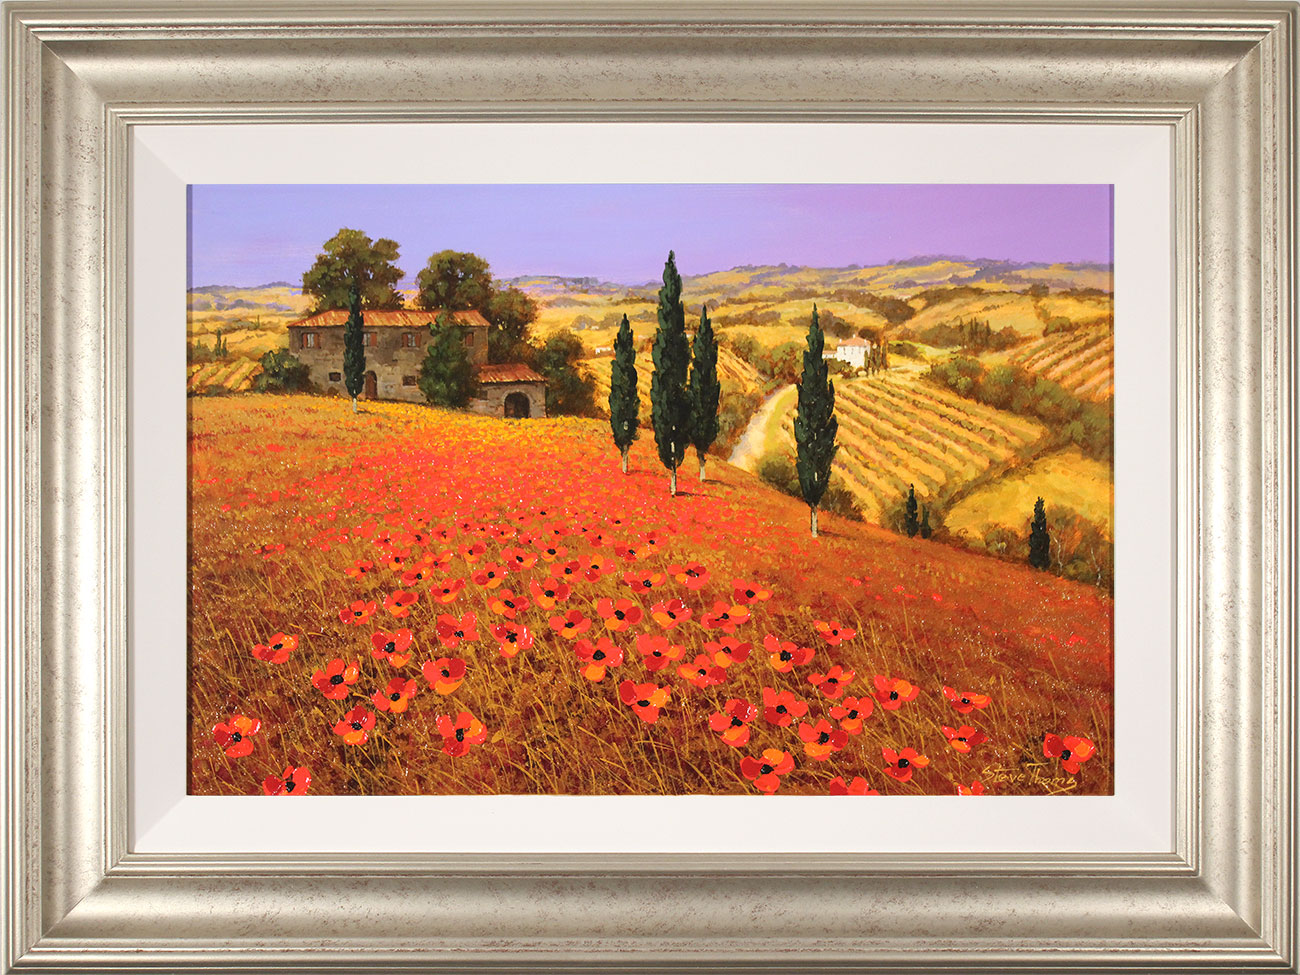 Steve Thoms, Original oil painting on panel, Tuscan Poppies Click to enlarge